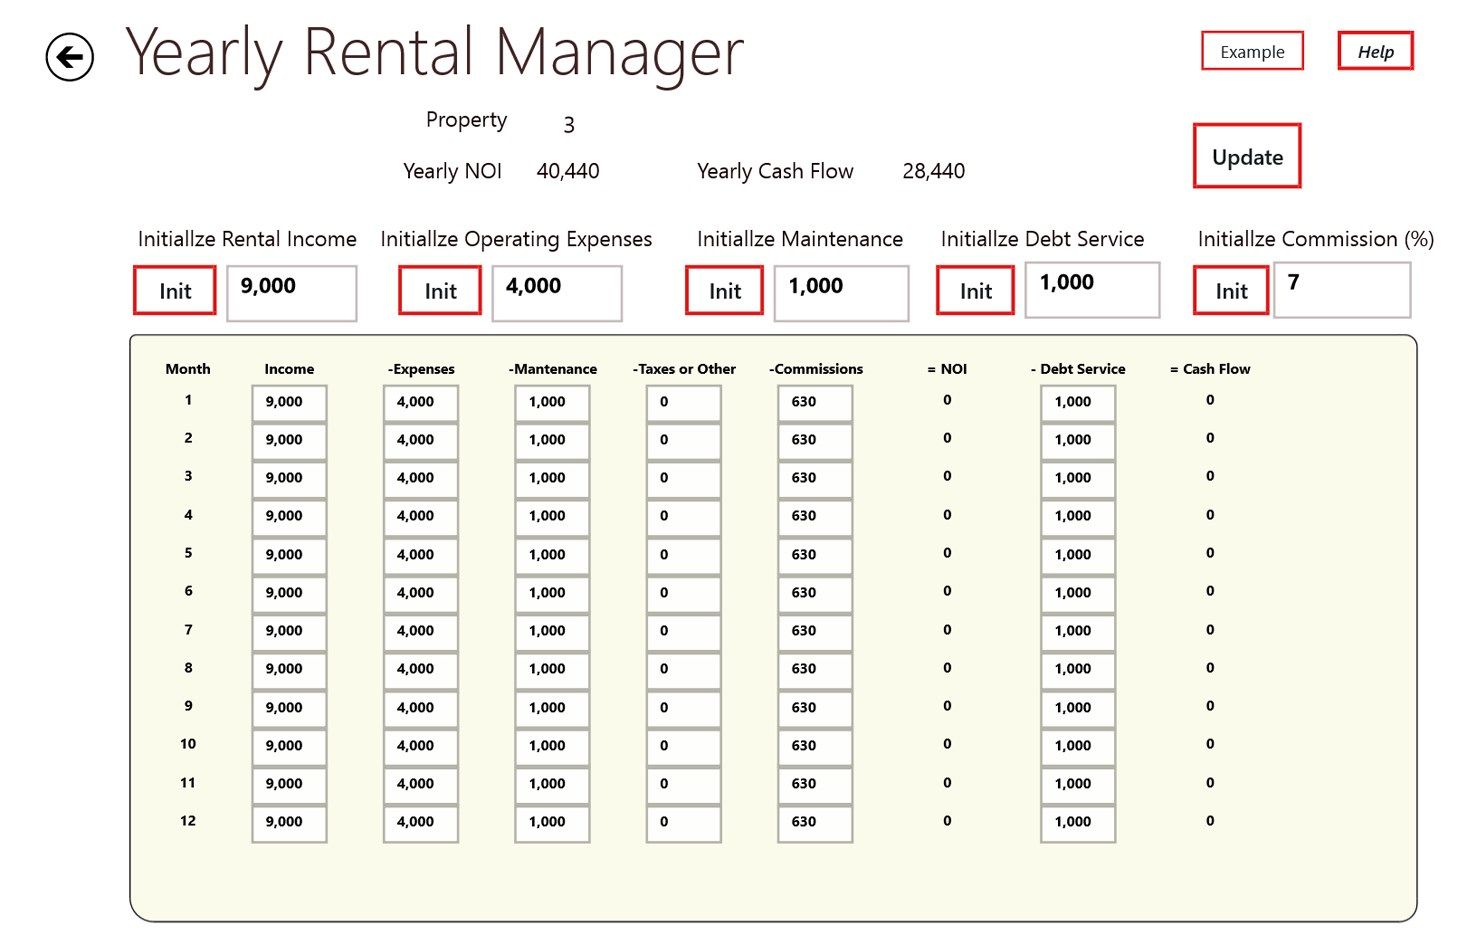 Yearly Rental Manager